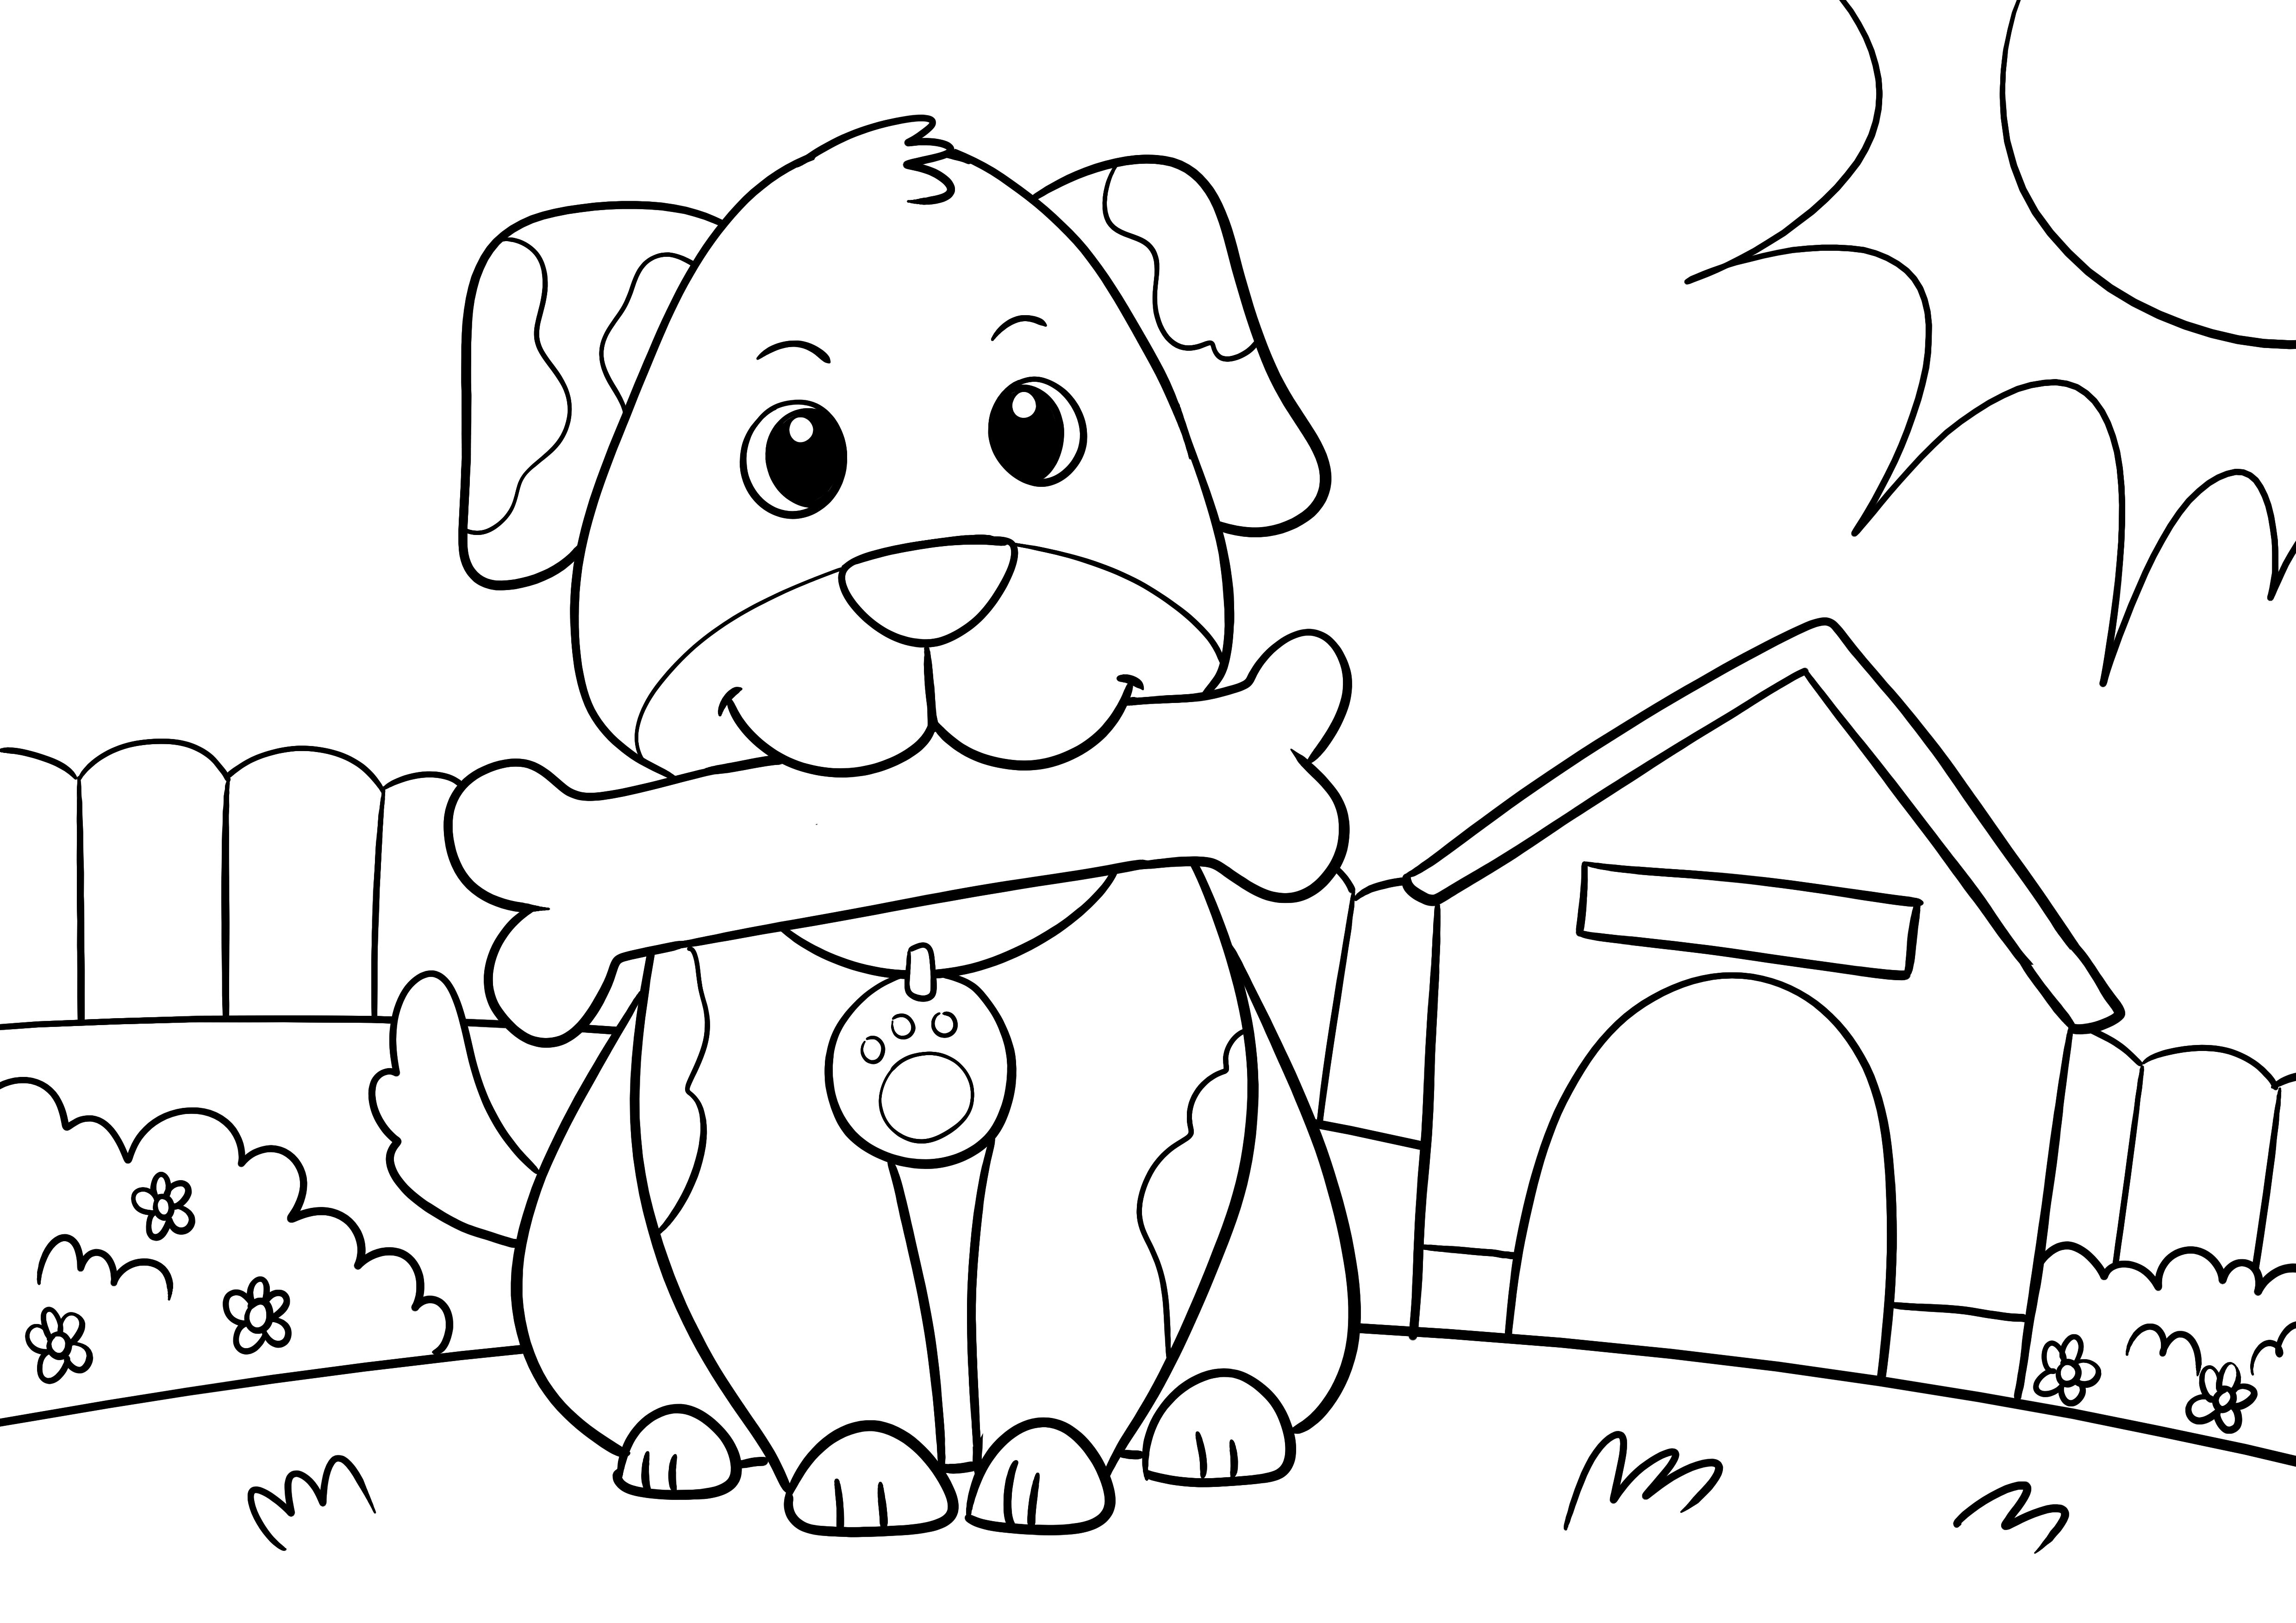 Cute dog coloring page